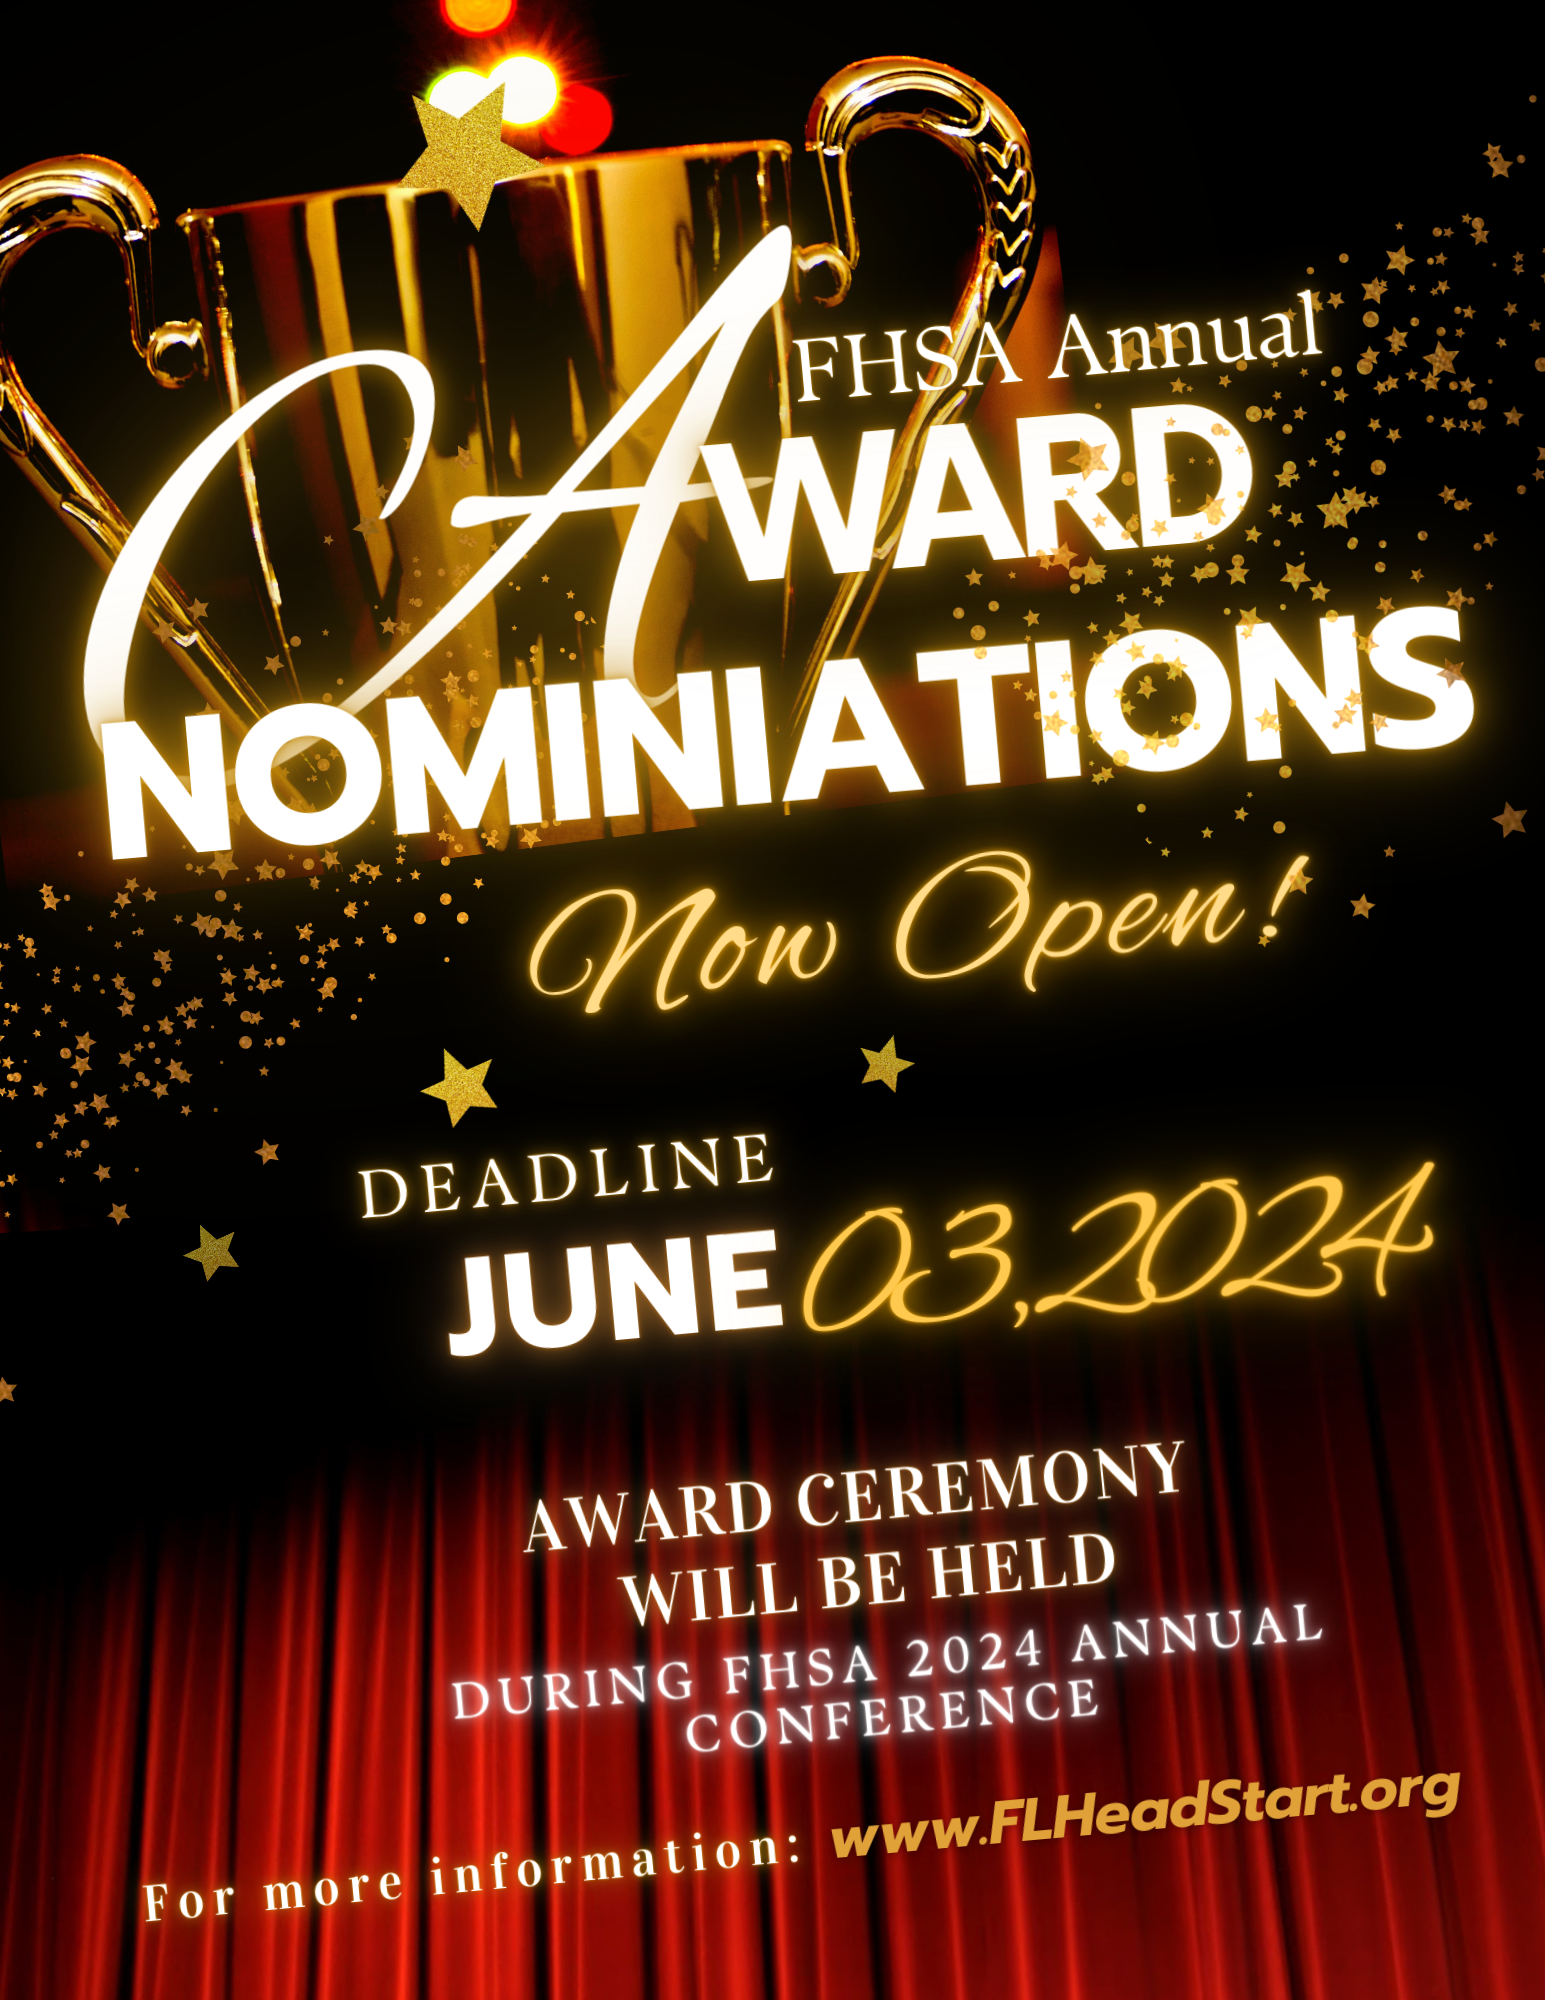 FHSA Award Nominations Now Open Image